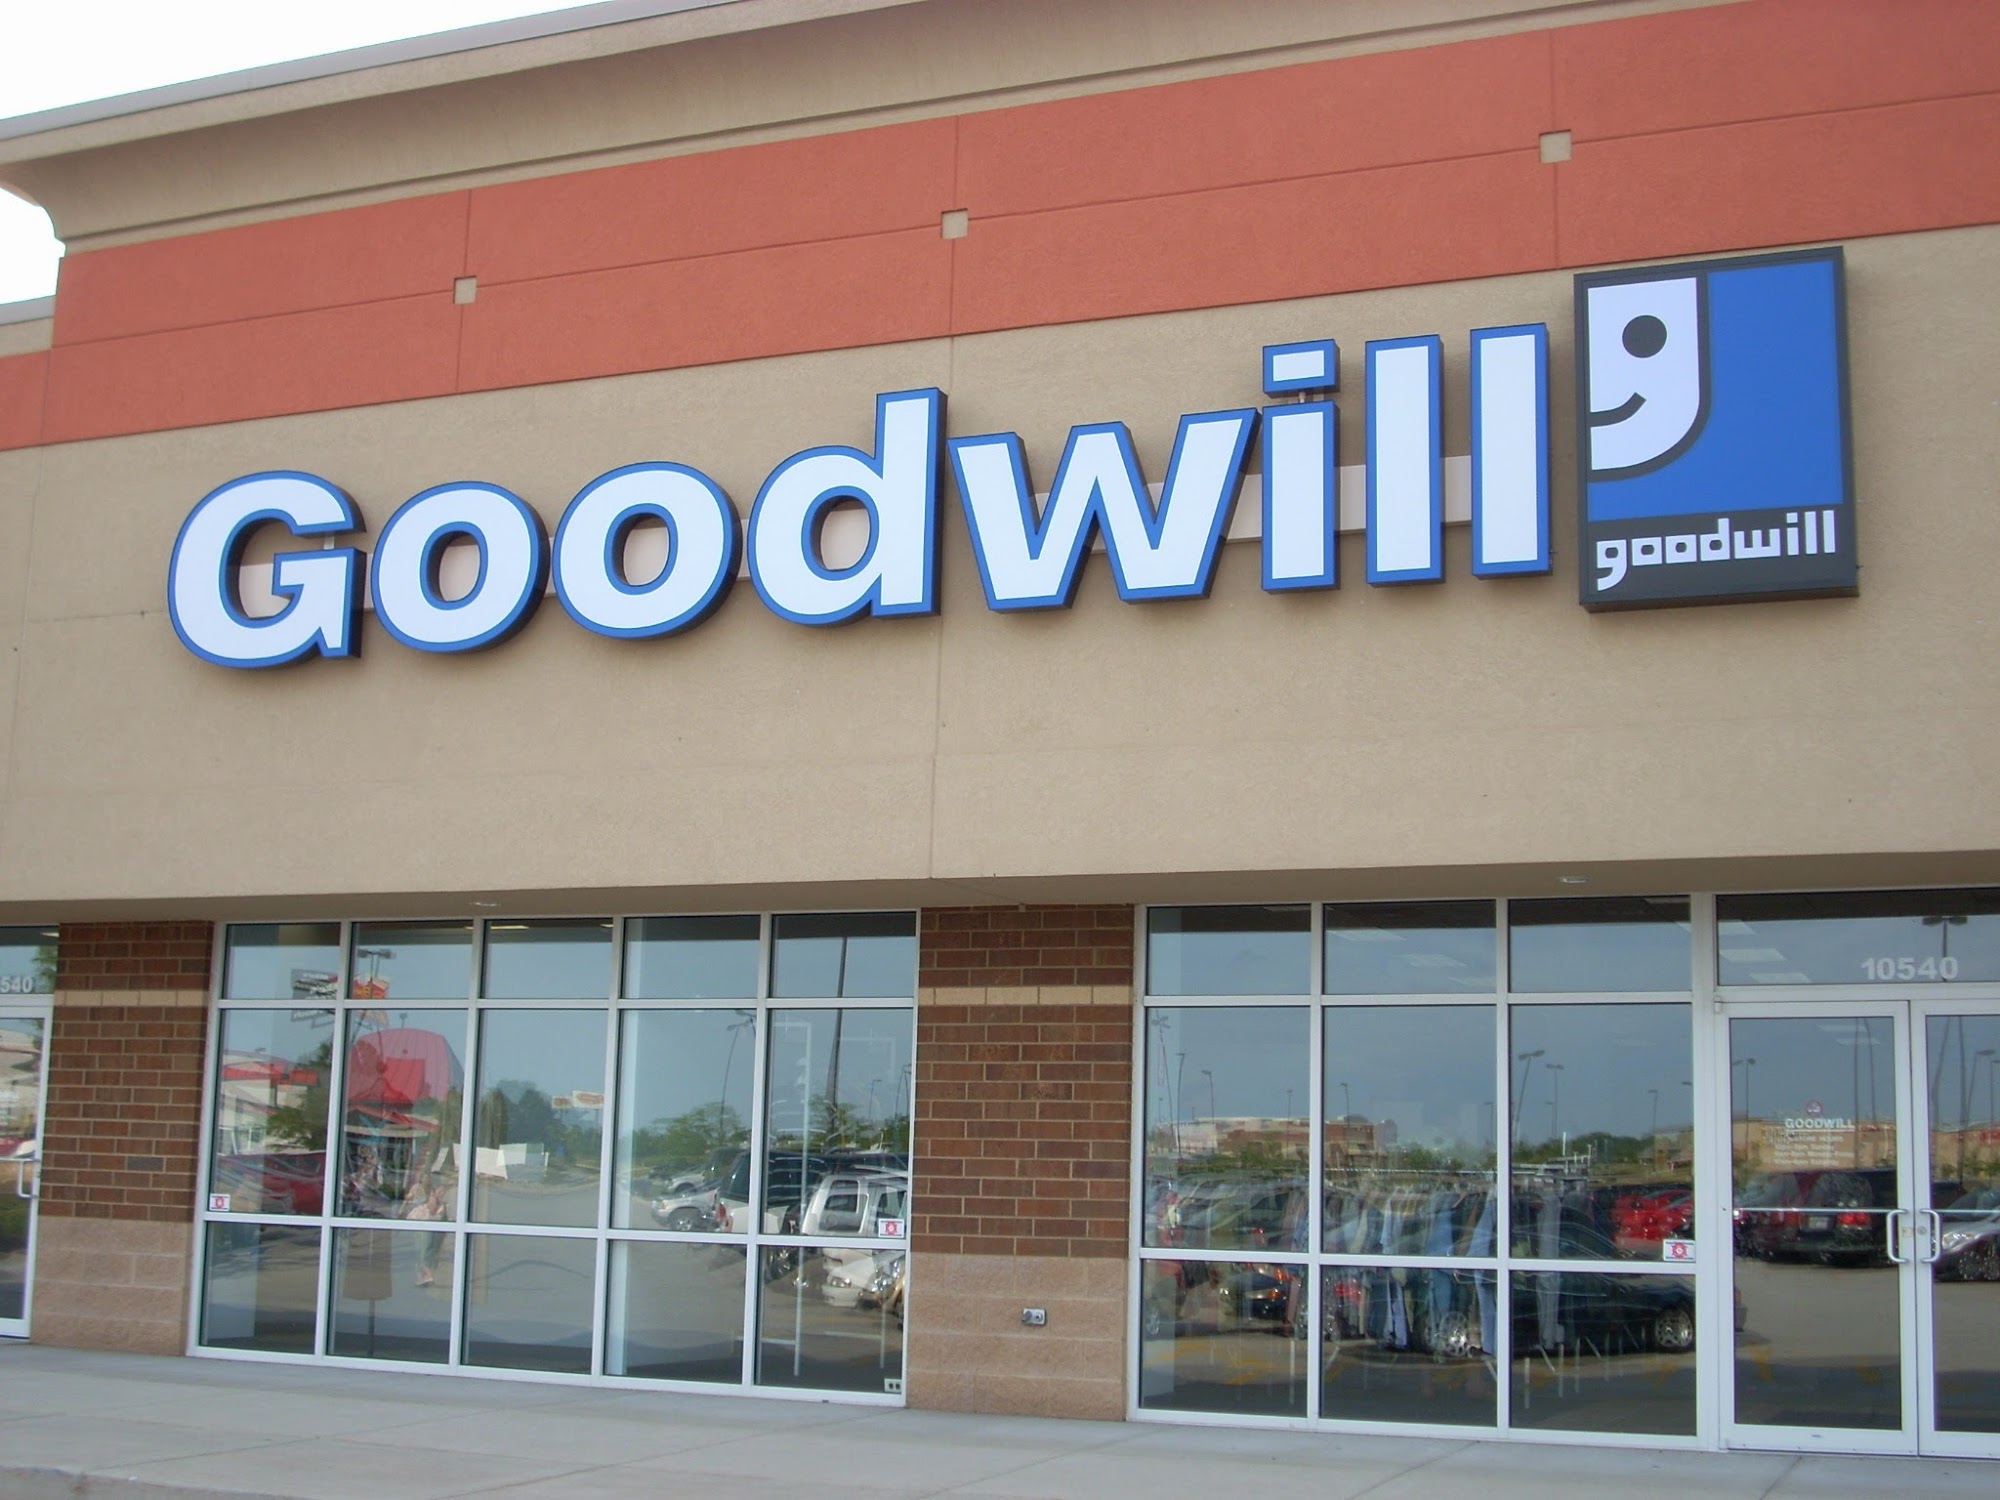 Goodwill Industries - Maysville Rd Store